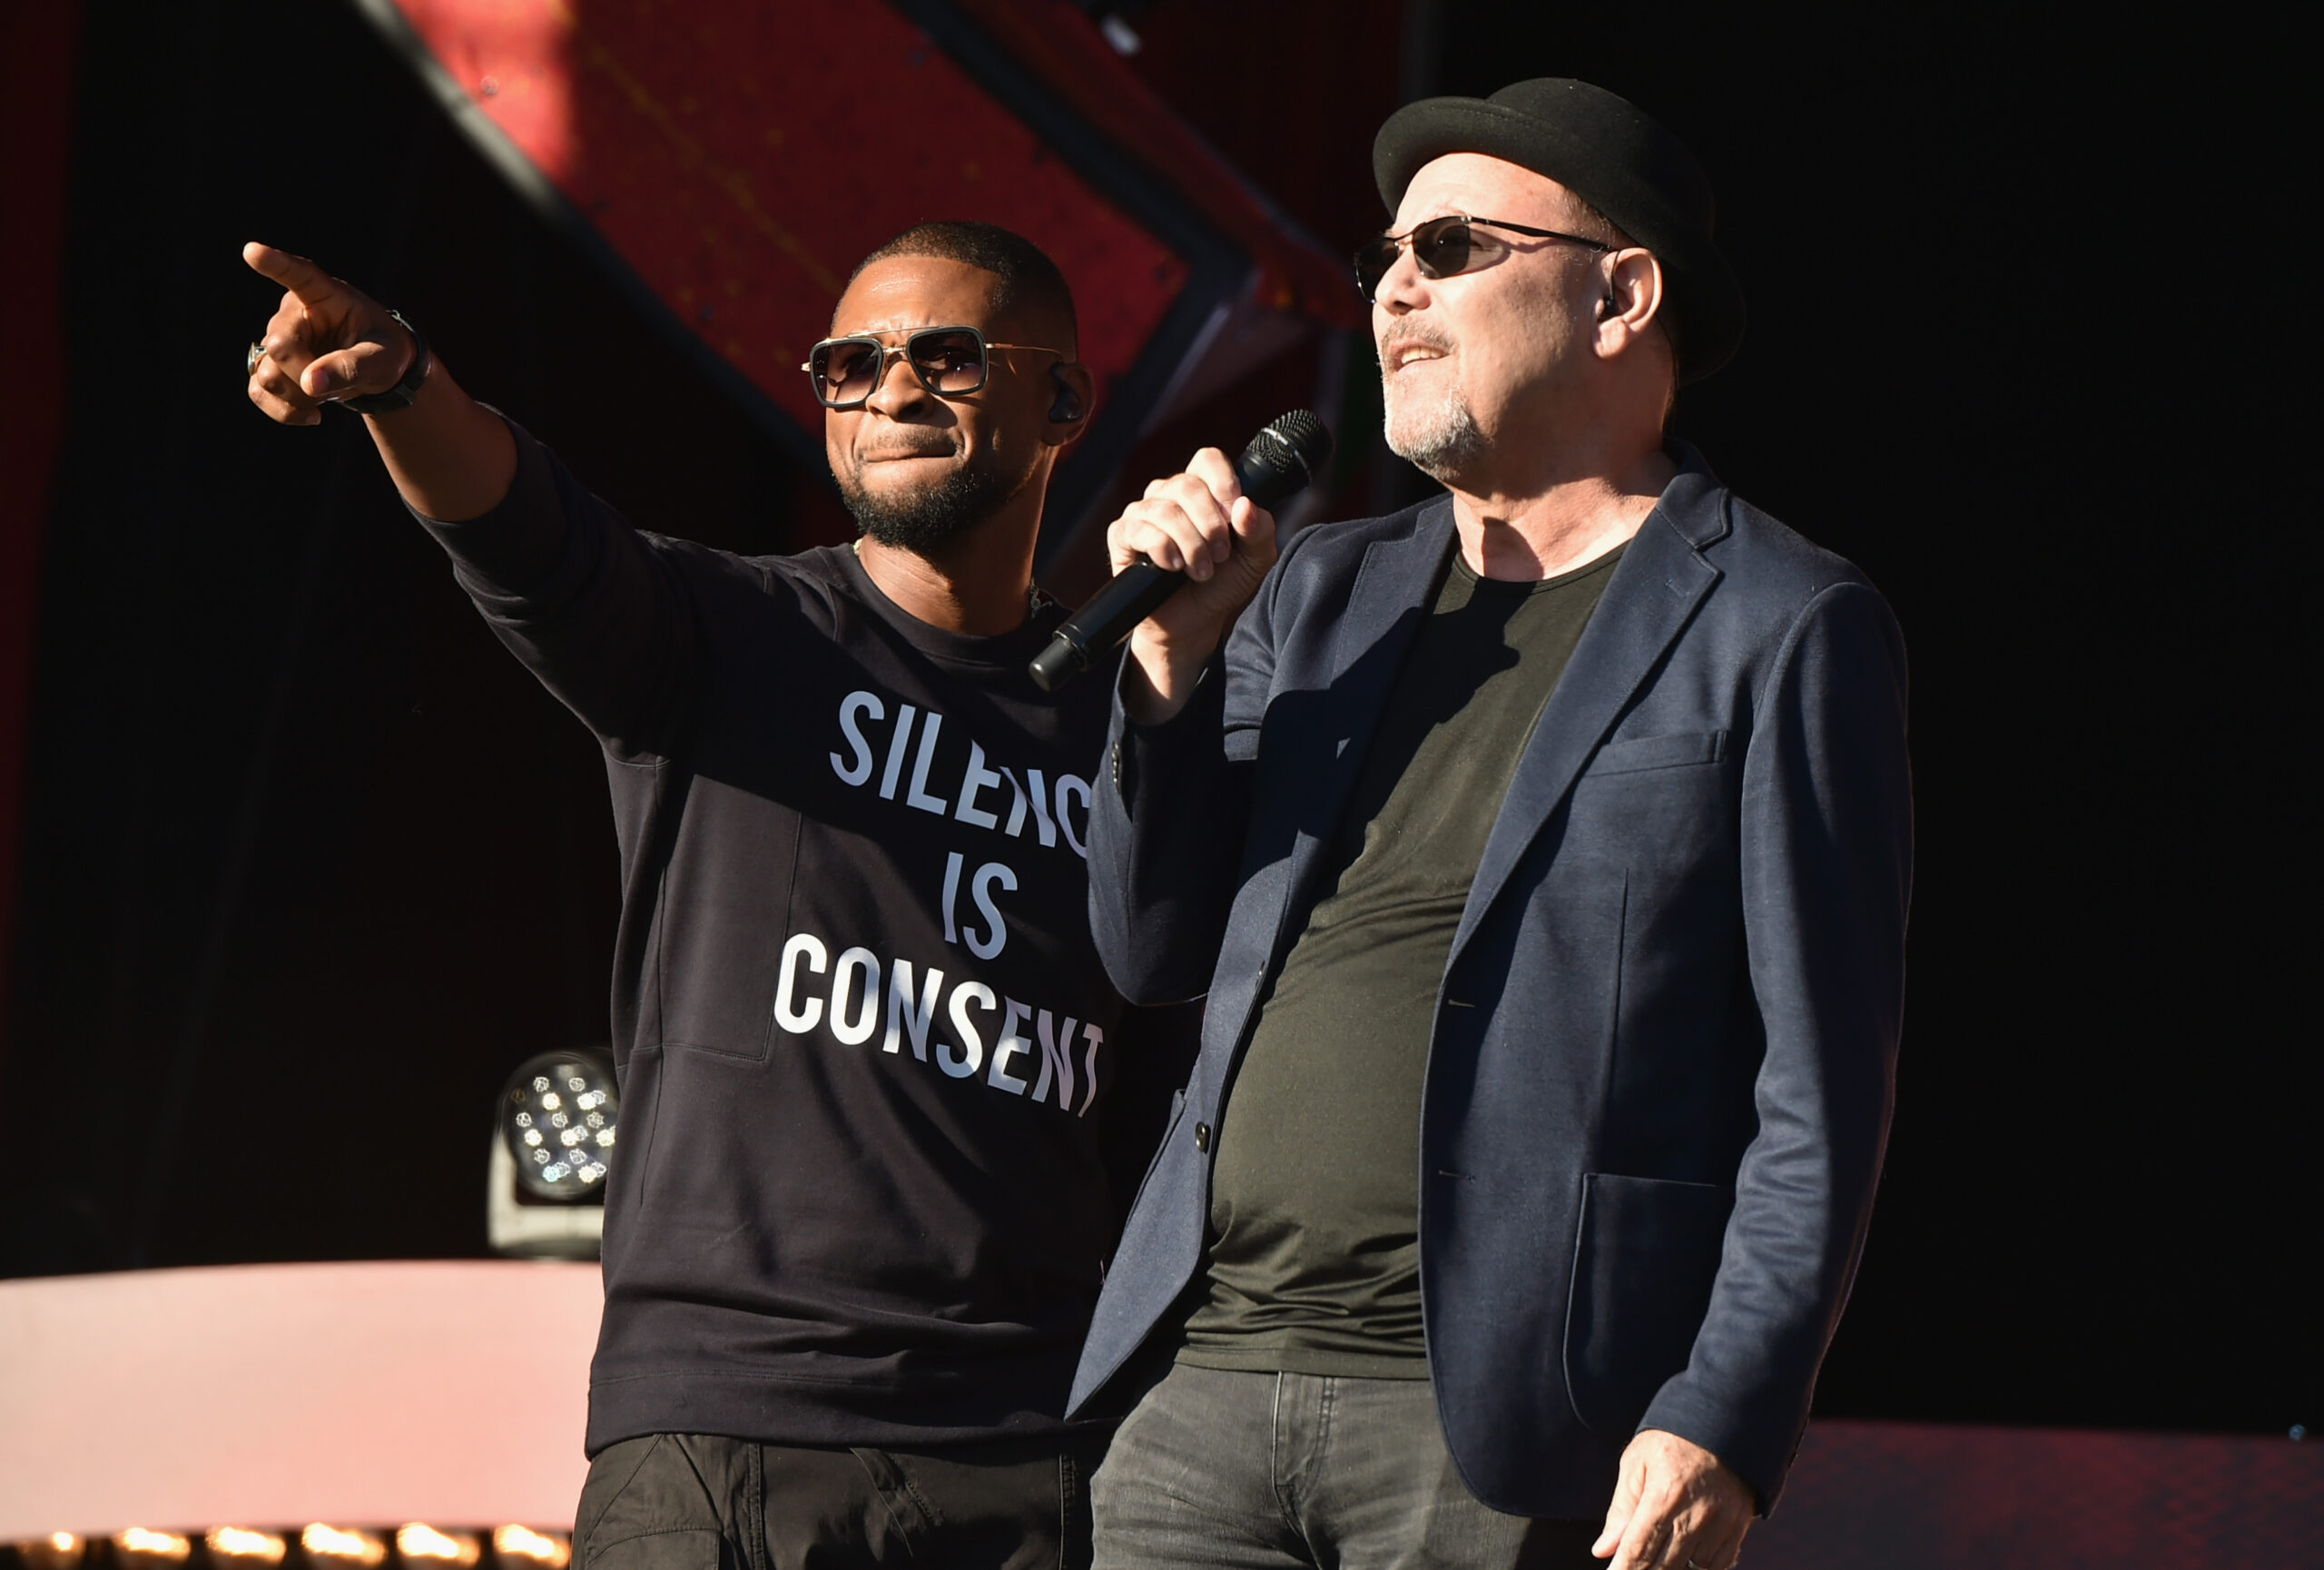 New York, NY - September 24: Singers Usher and Ruben Blades perform onstage at the 2016 Global Citizen Festival In Central Park To End Extreme Poverty By 2030 at Central Park on September 24, 2016 in New York City. (Photo by Theo Wargo/Getty Images for Global Citizen)